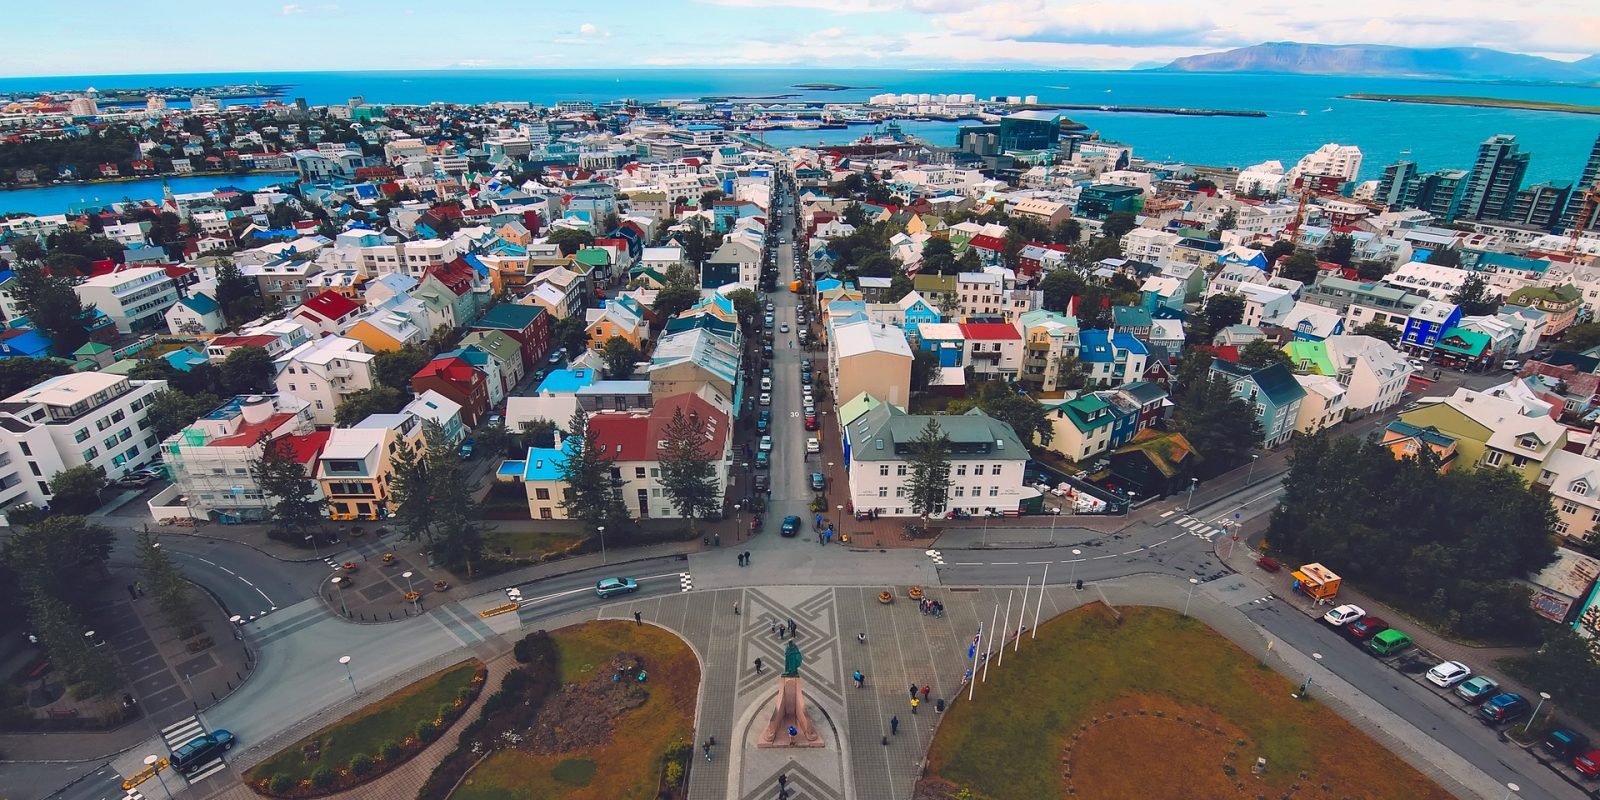 Reykjavik is looking to get rid of half its gas stations by 2025